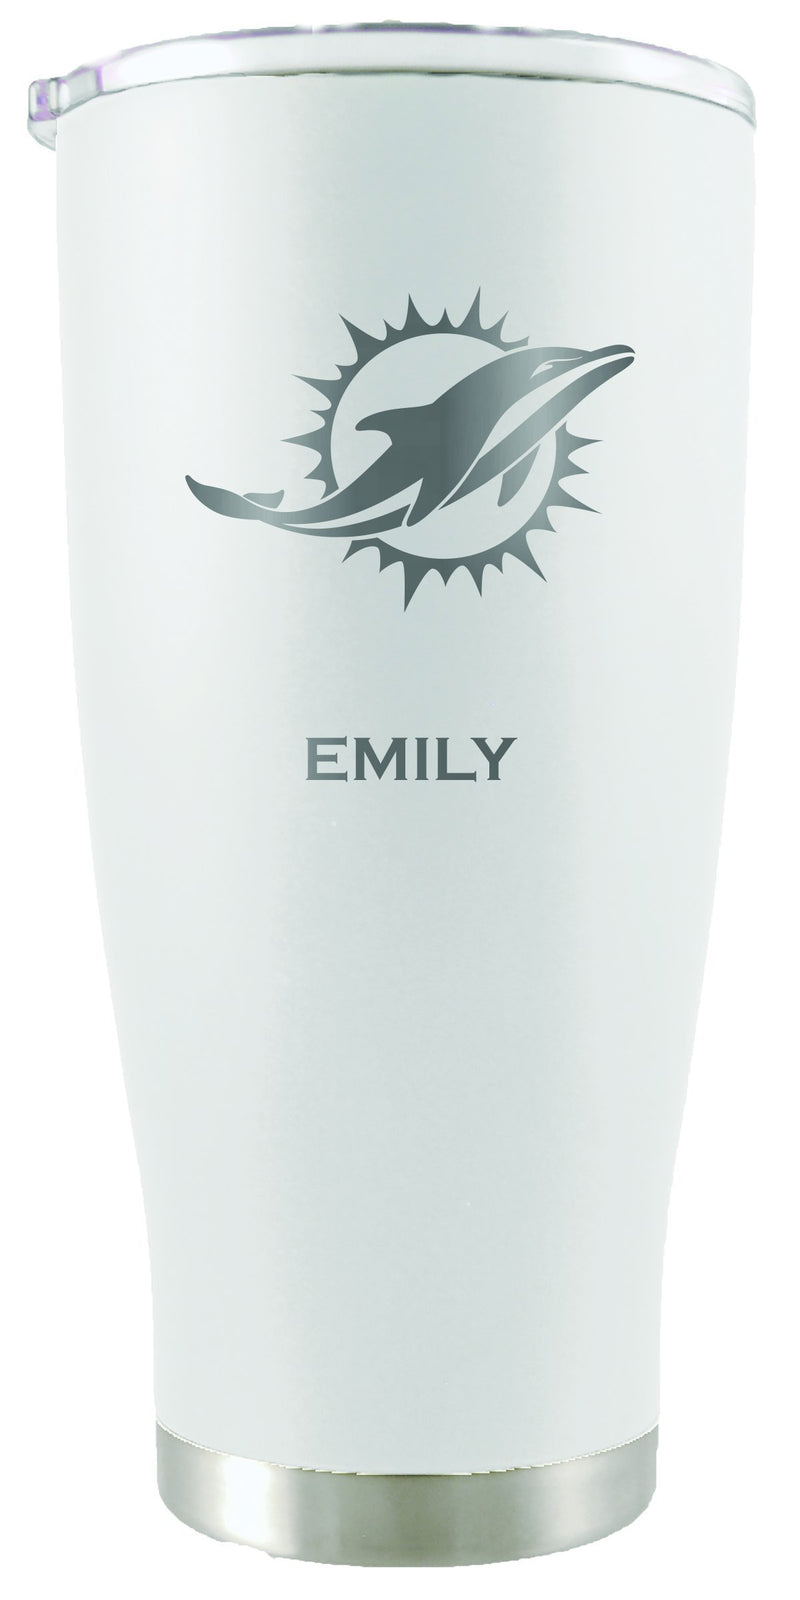 20oz White Personalized Stainless Steel Tumbler | Miami Dolphins
20oz, CurrentProduct, Drinkware_category_All, MIA, Miami Dolphins, NFL, Personalized_Personalized
The Memory Company